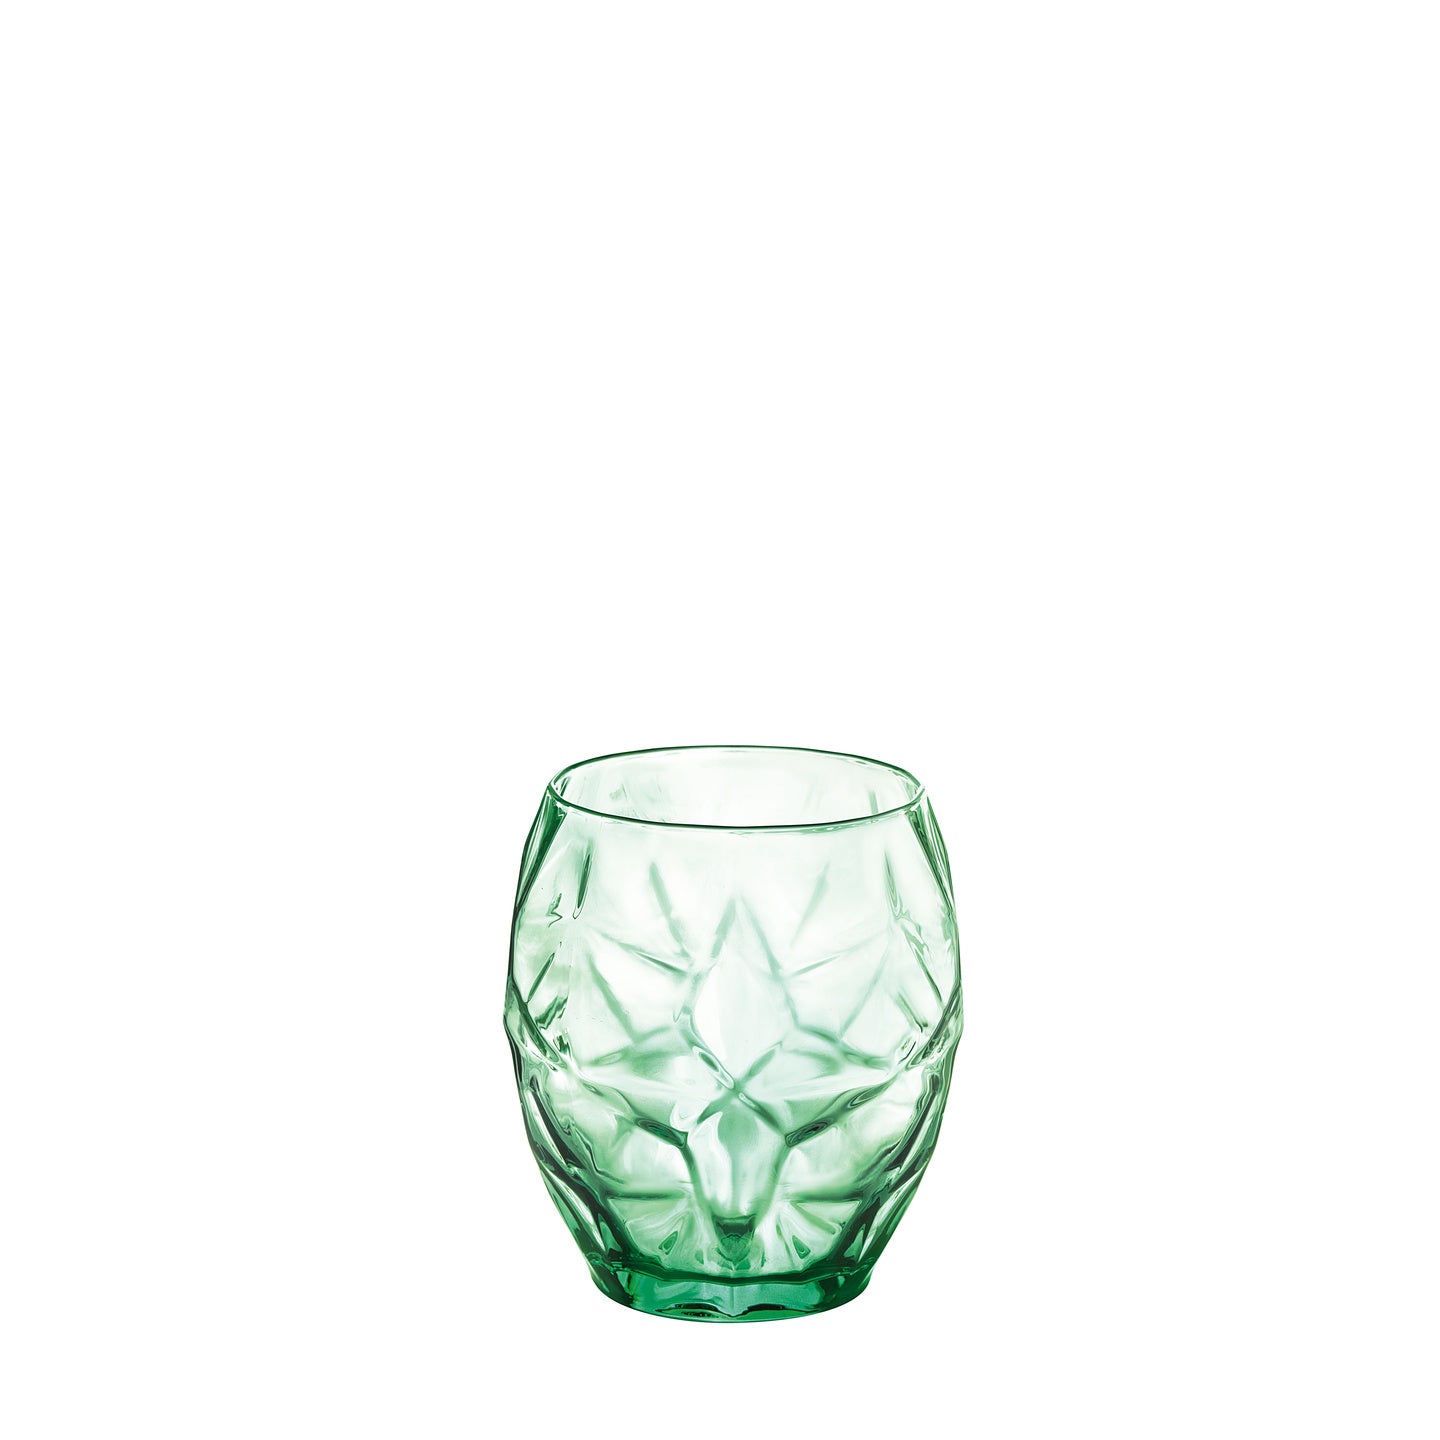 Deco Set of 6 Glasses – Coming Soon